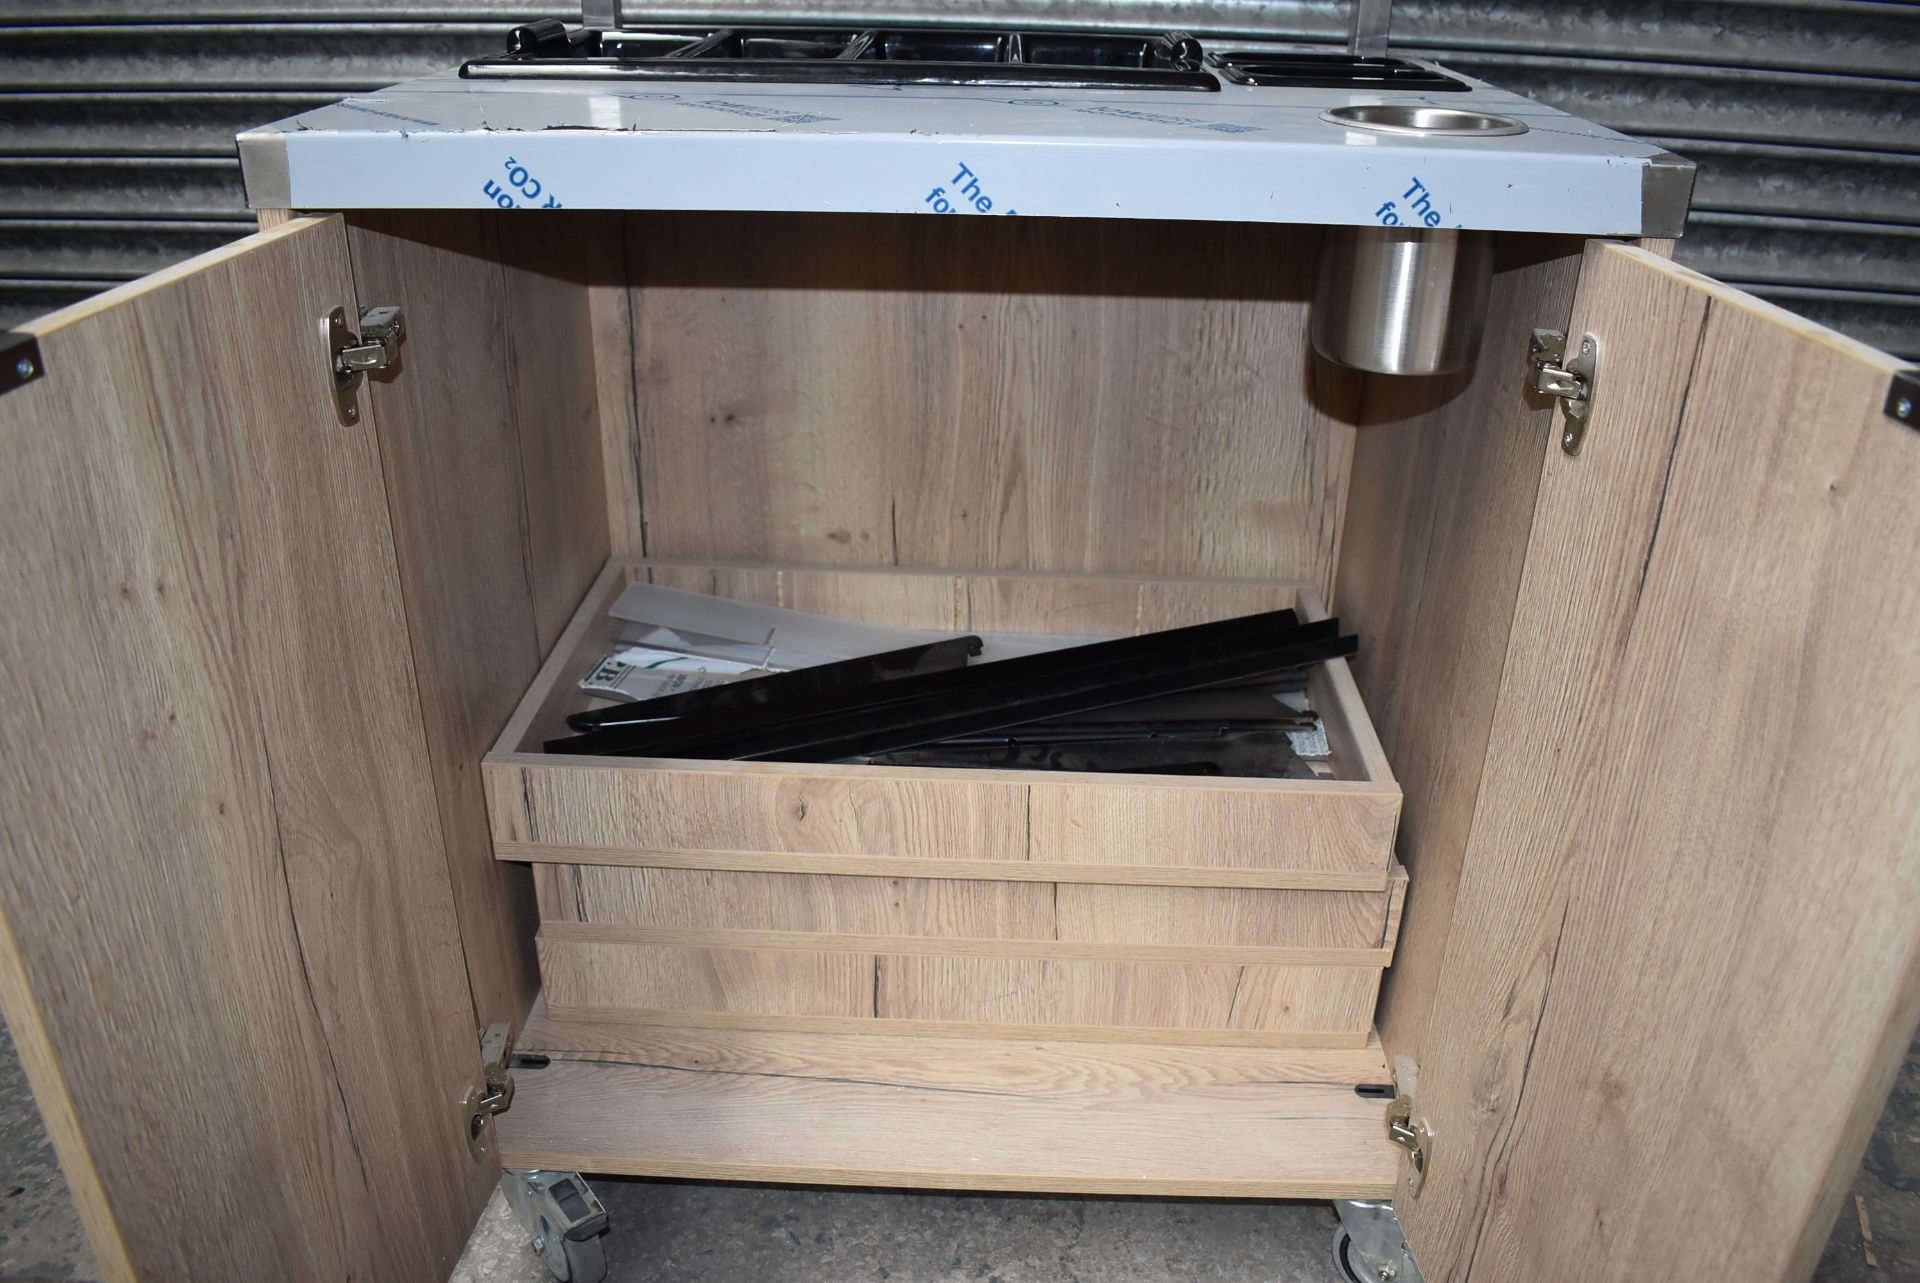 1 x Cutlery Service Trolley Featuring an Oak Cabinet With Internal Drawers, Stainless Steel - Image 2 of 13